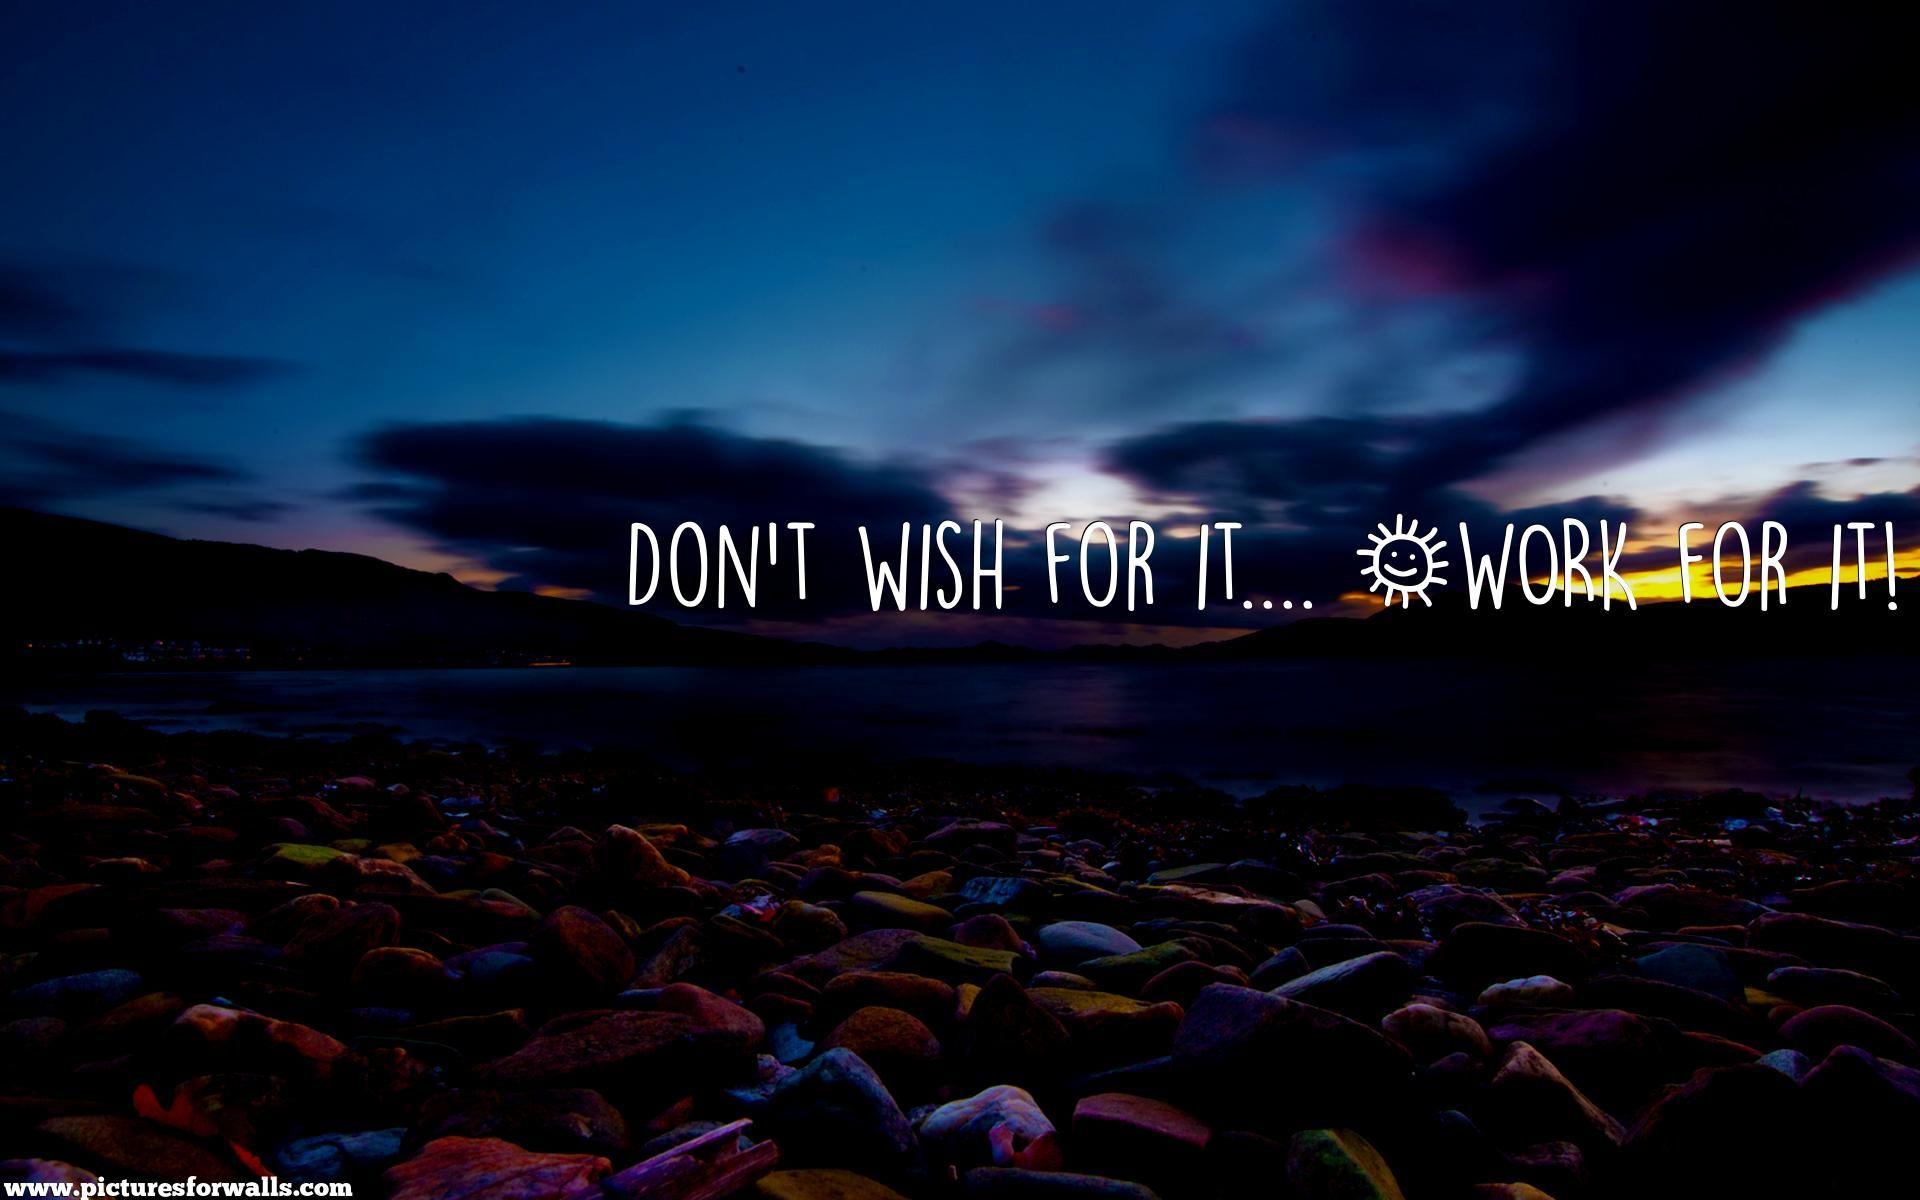 Don't wish for it for it Wallpaper [oc] [1920x1200